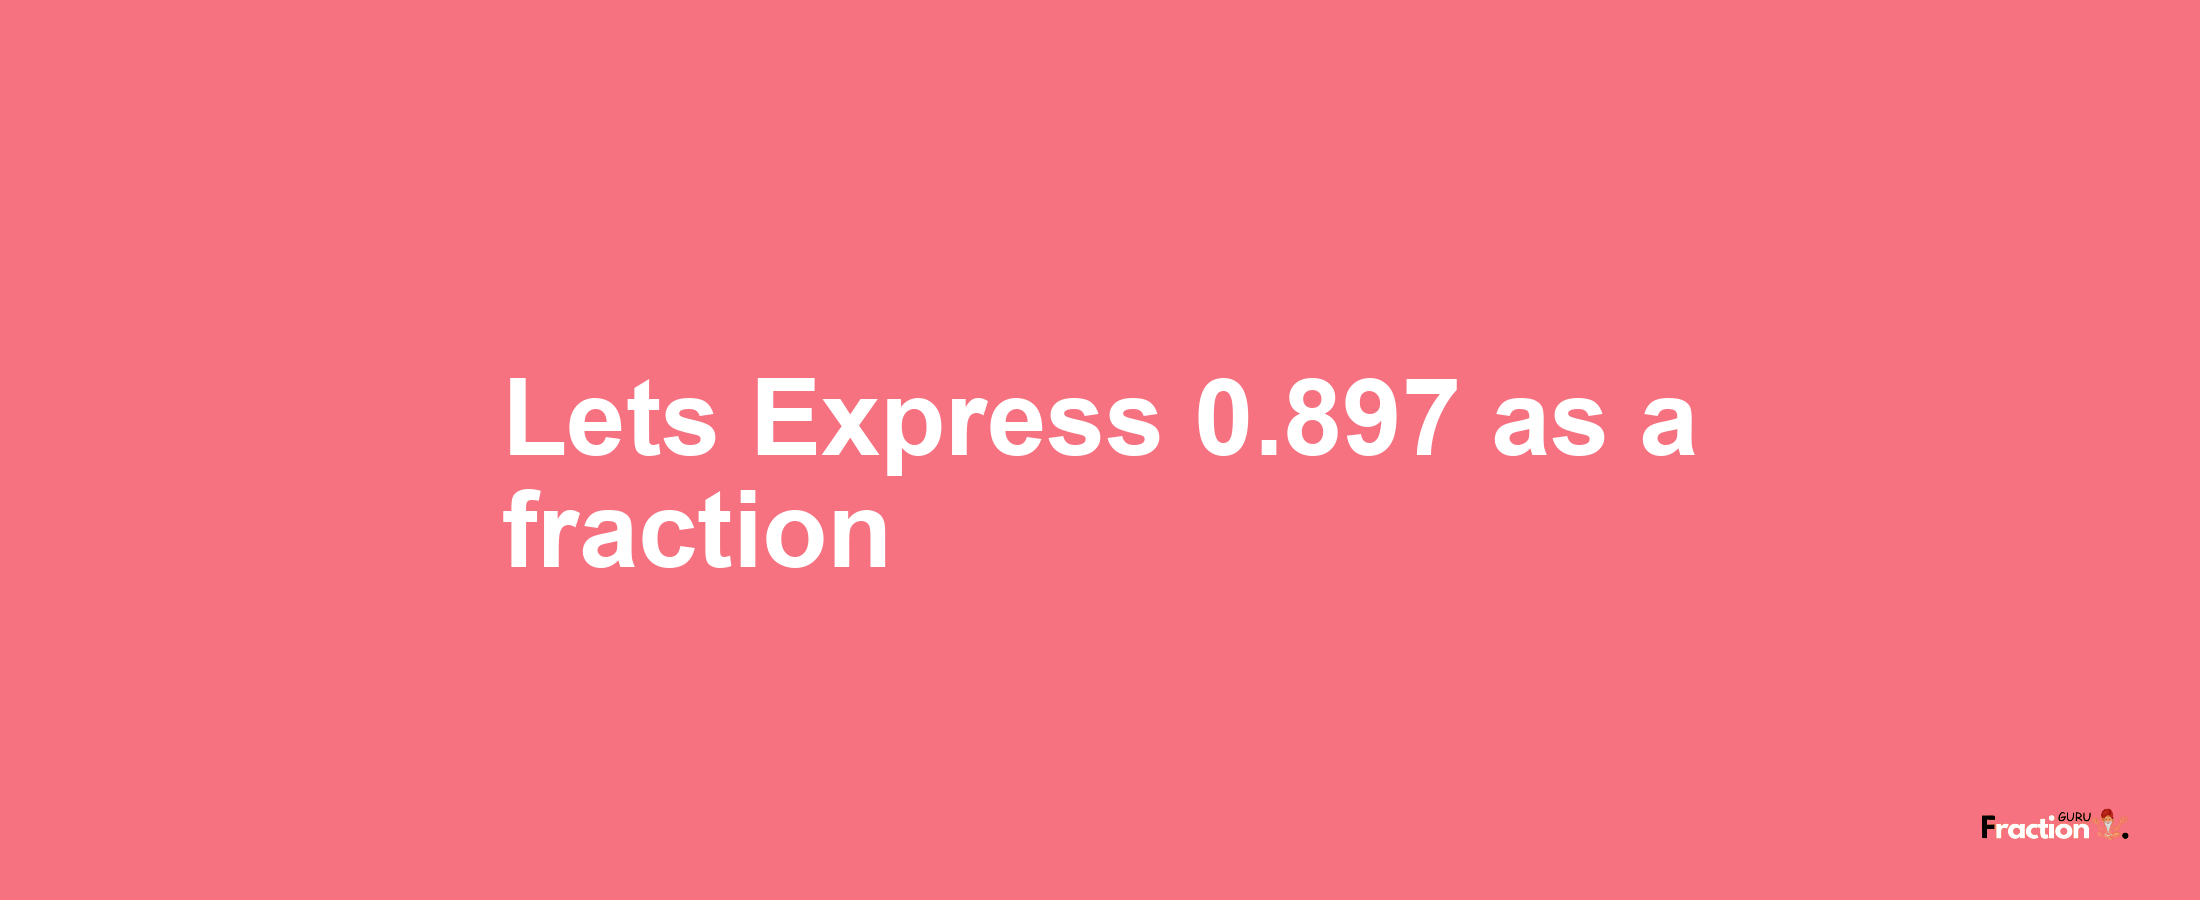 Lets Express 0.897 as afraction